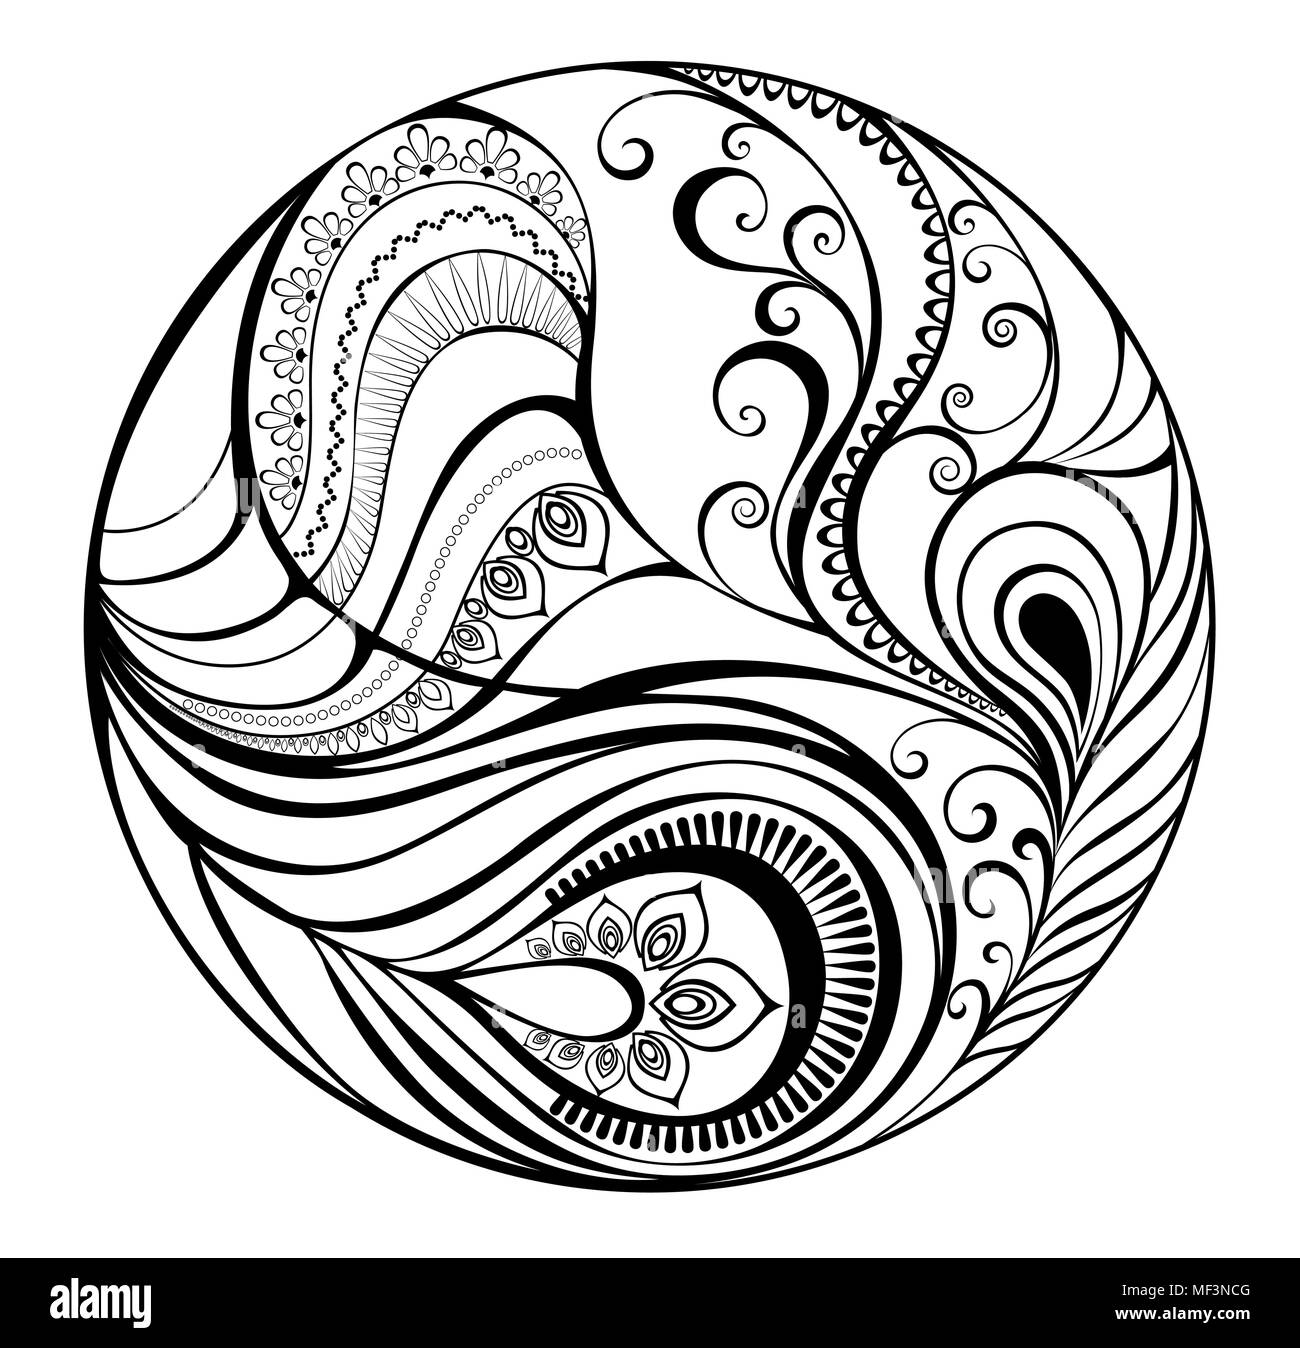 Round contour abstraction with peacock feather and pattern on white background. Tattoos style. Stock Vector